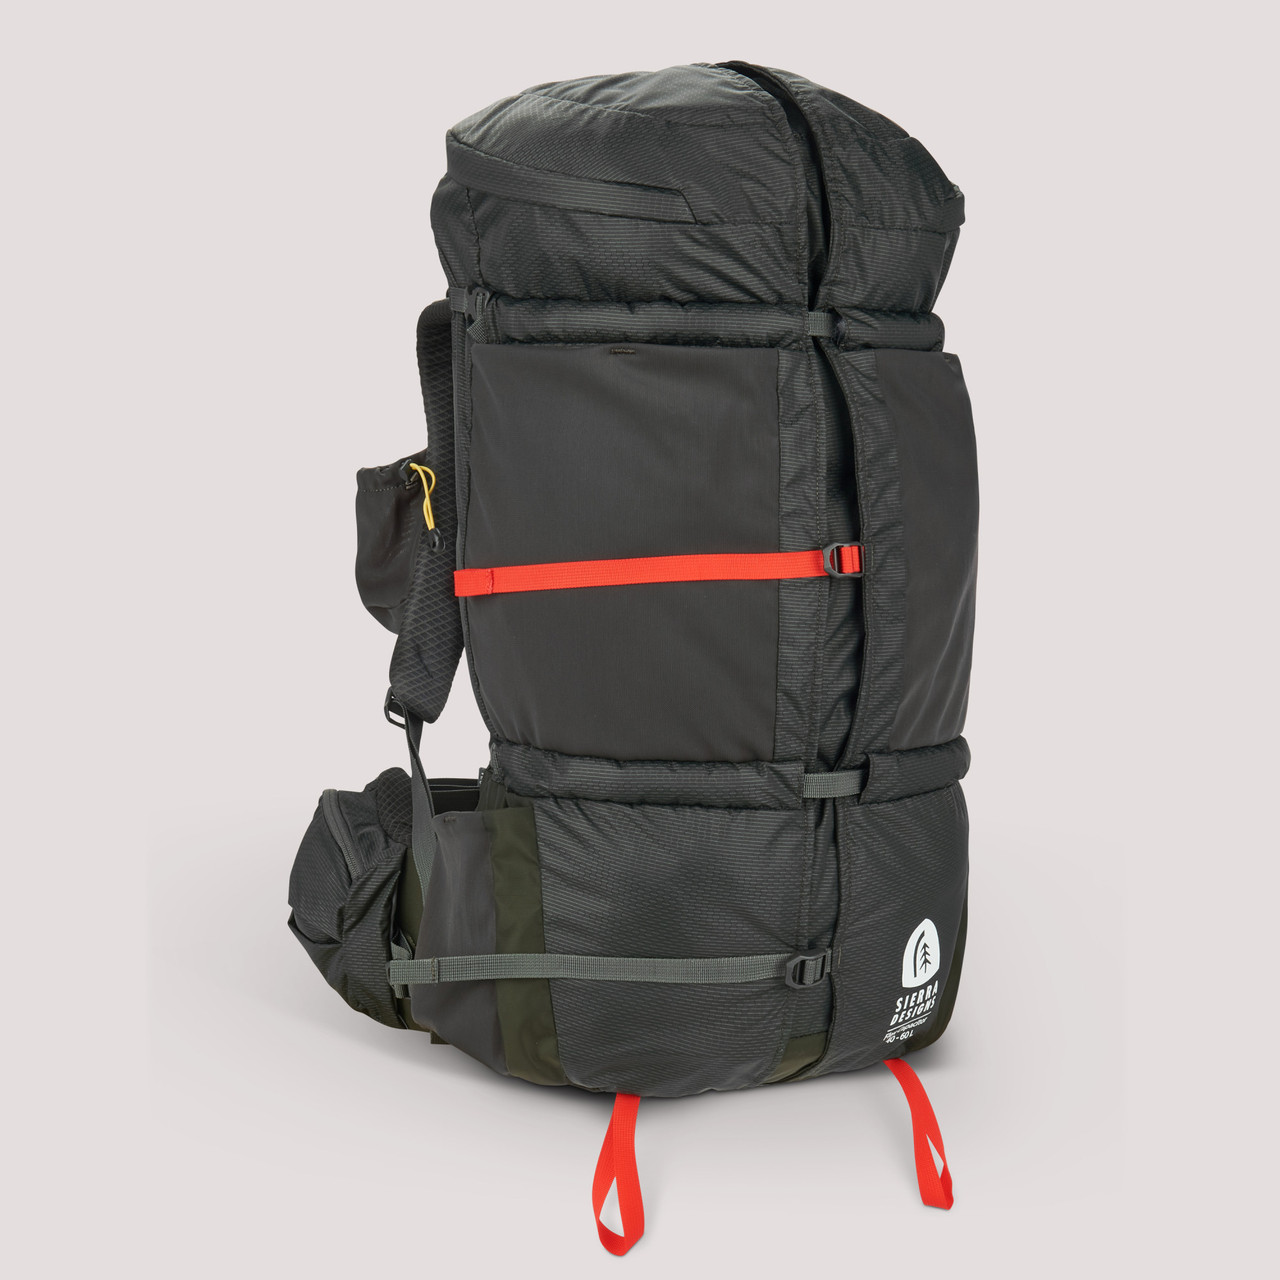 All-in-One Backpack, Jacket & Tent